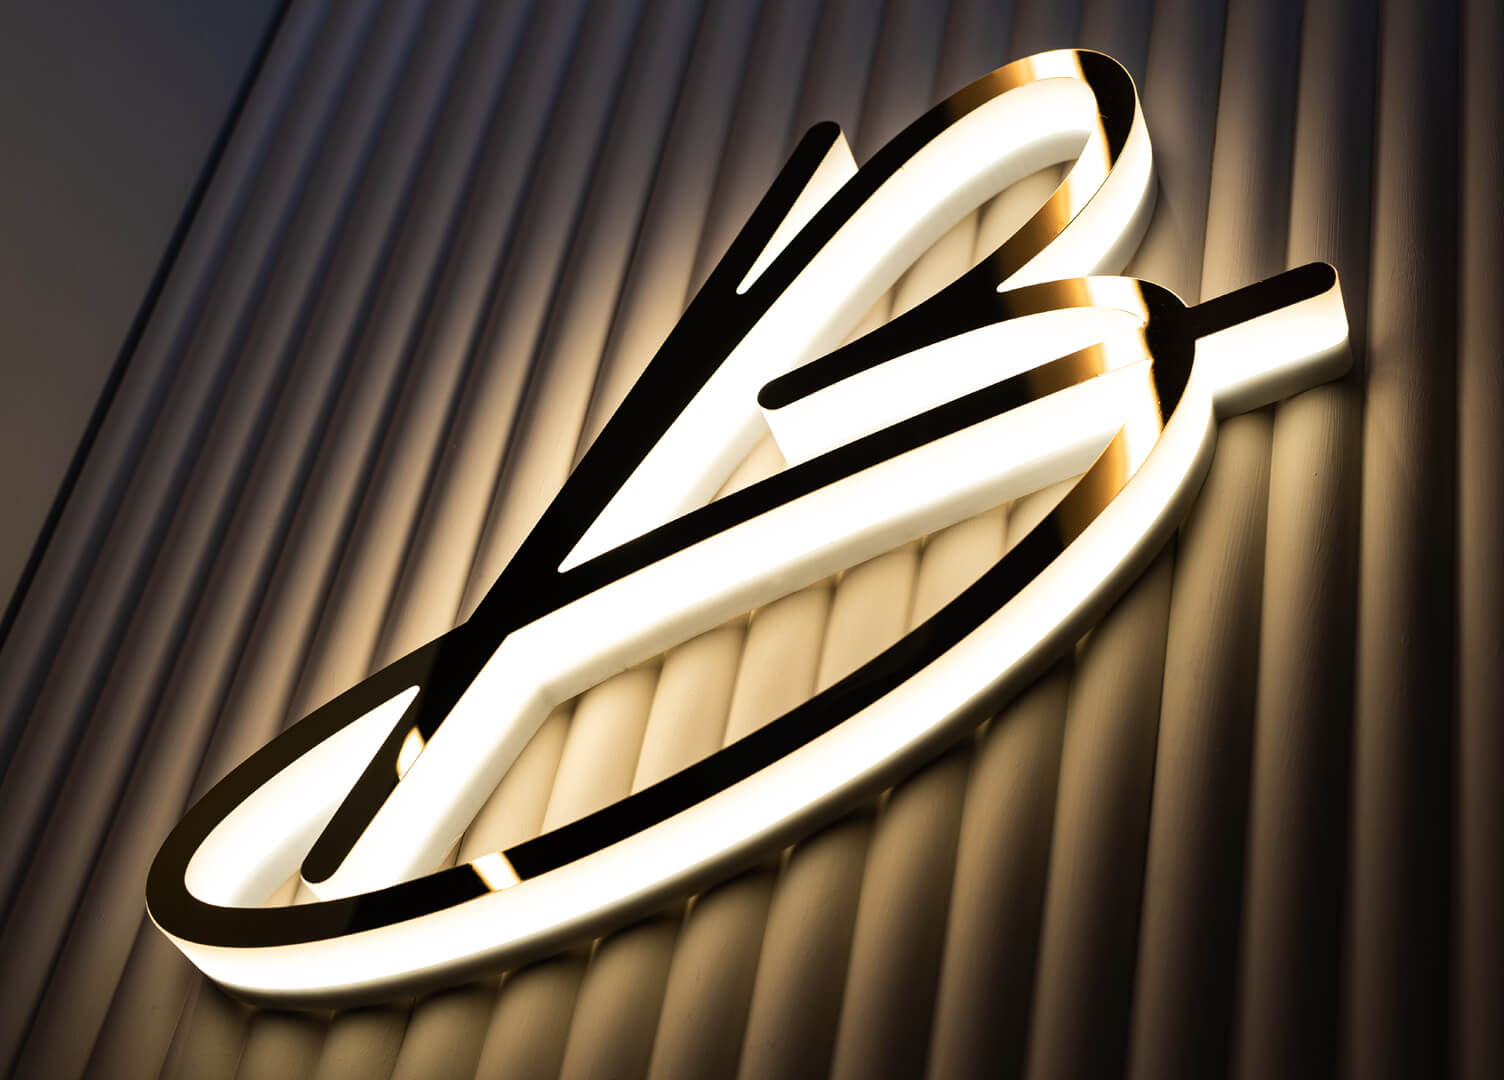 Blushington Letter B - Letter B with Blushington logo in gold, glowing along the LED outline